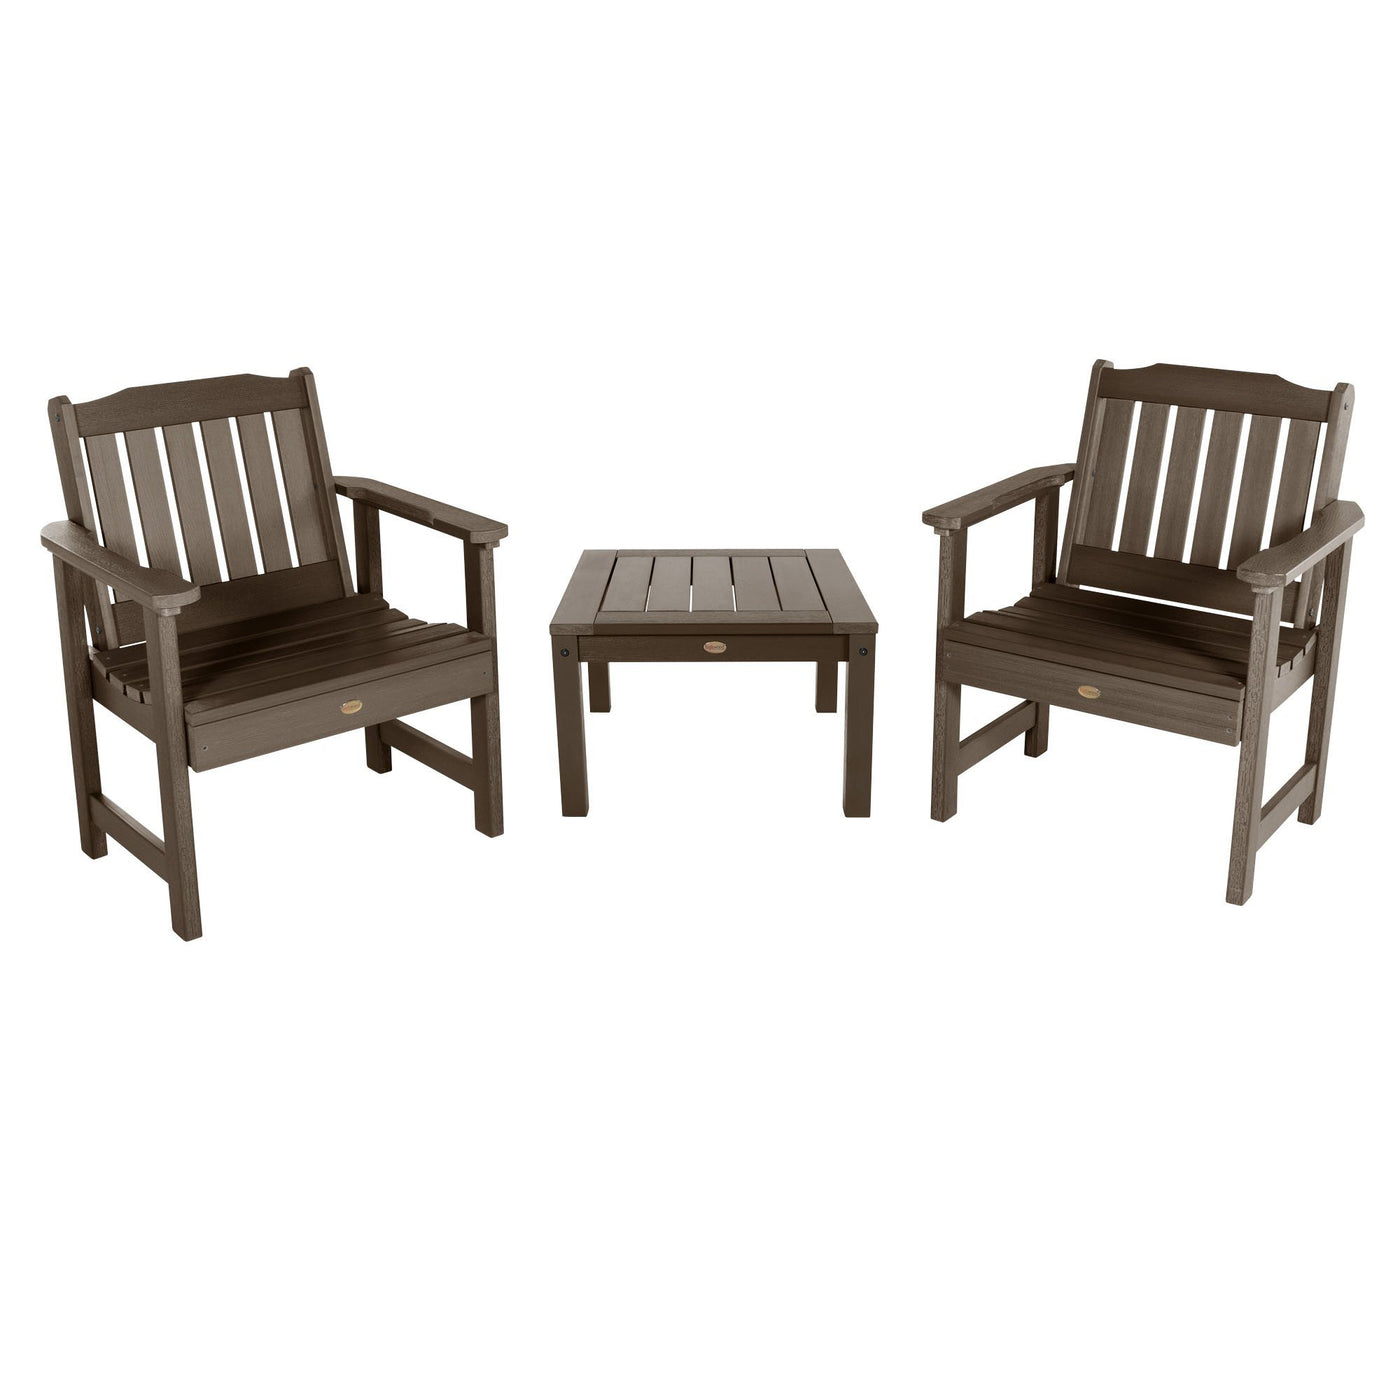 2 Lehigh Garden Chairs with 1 Square Side Table Highwood USA Weathered Acorn 